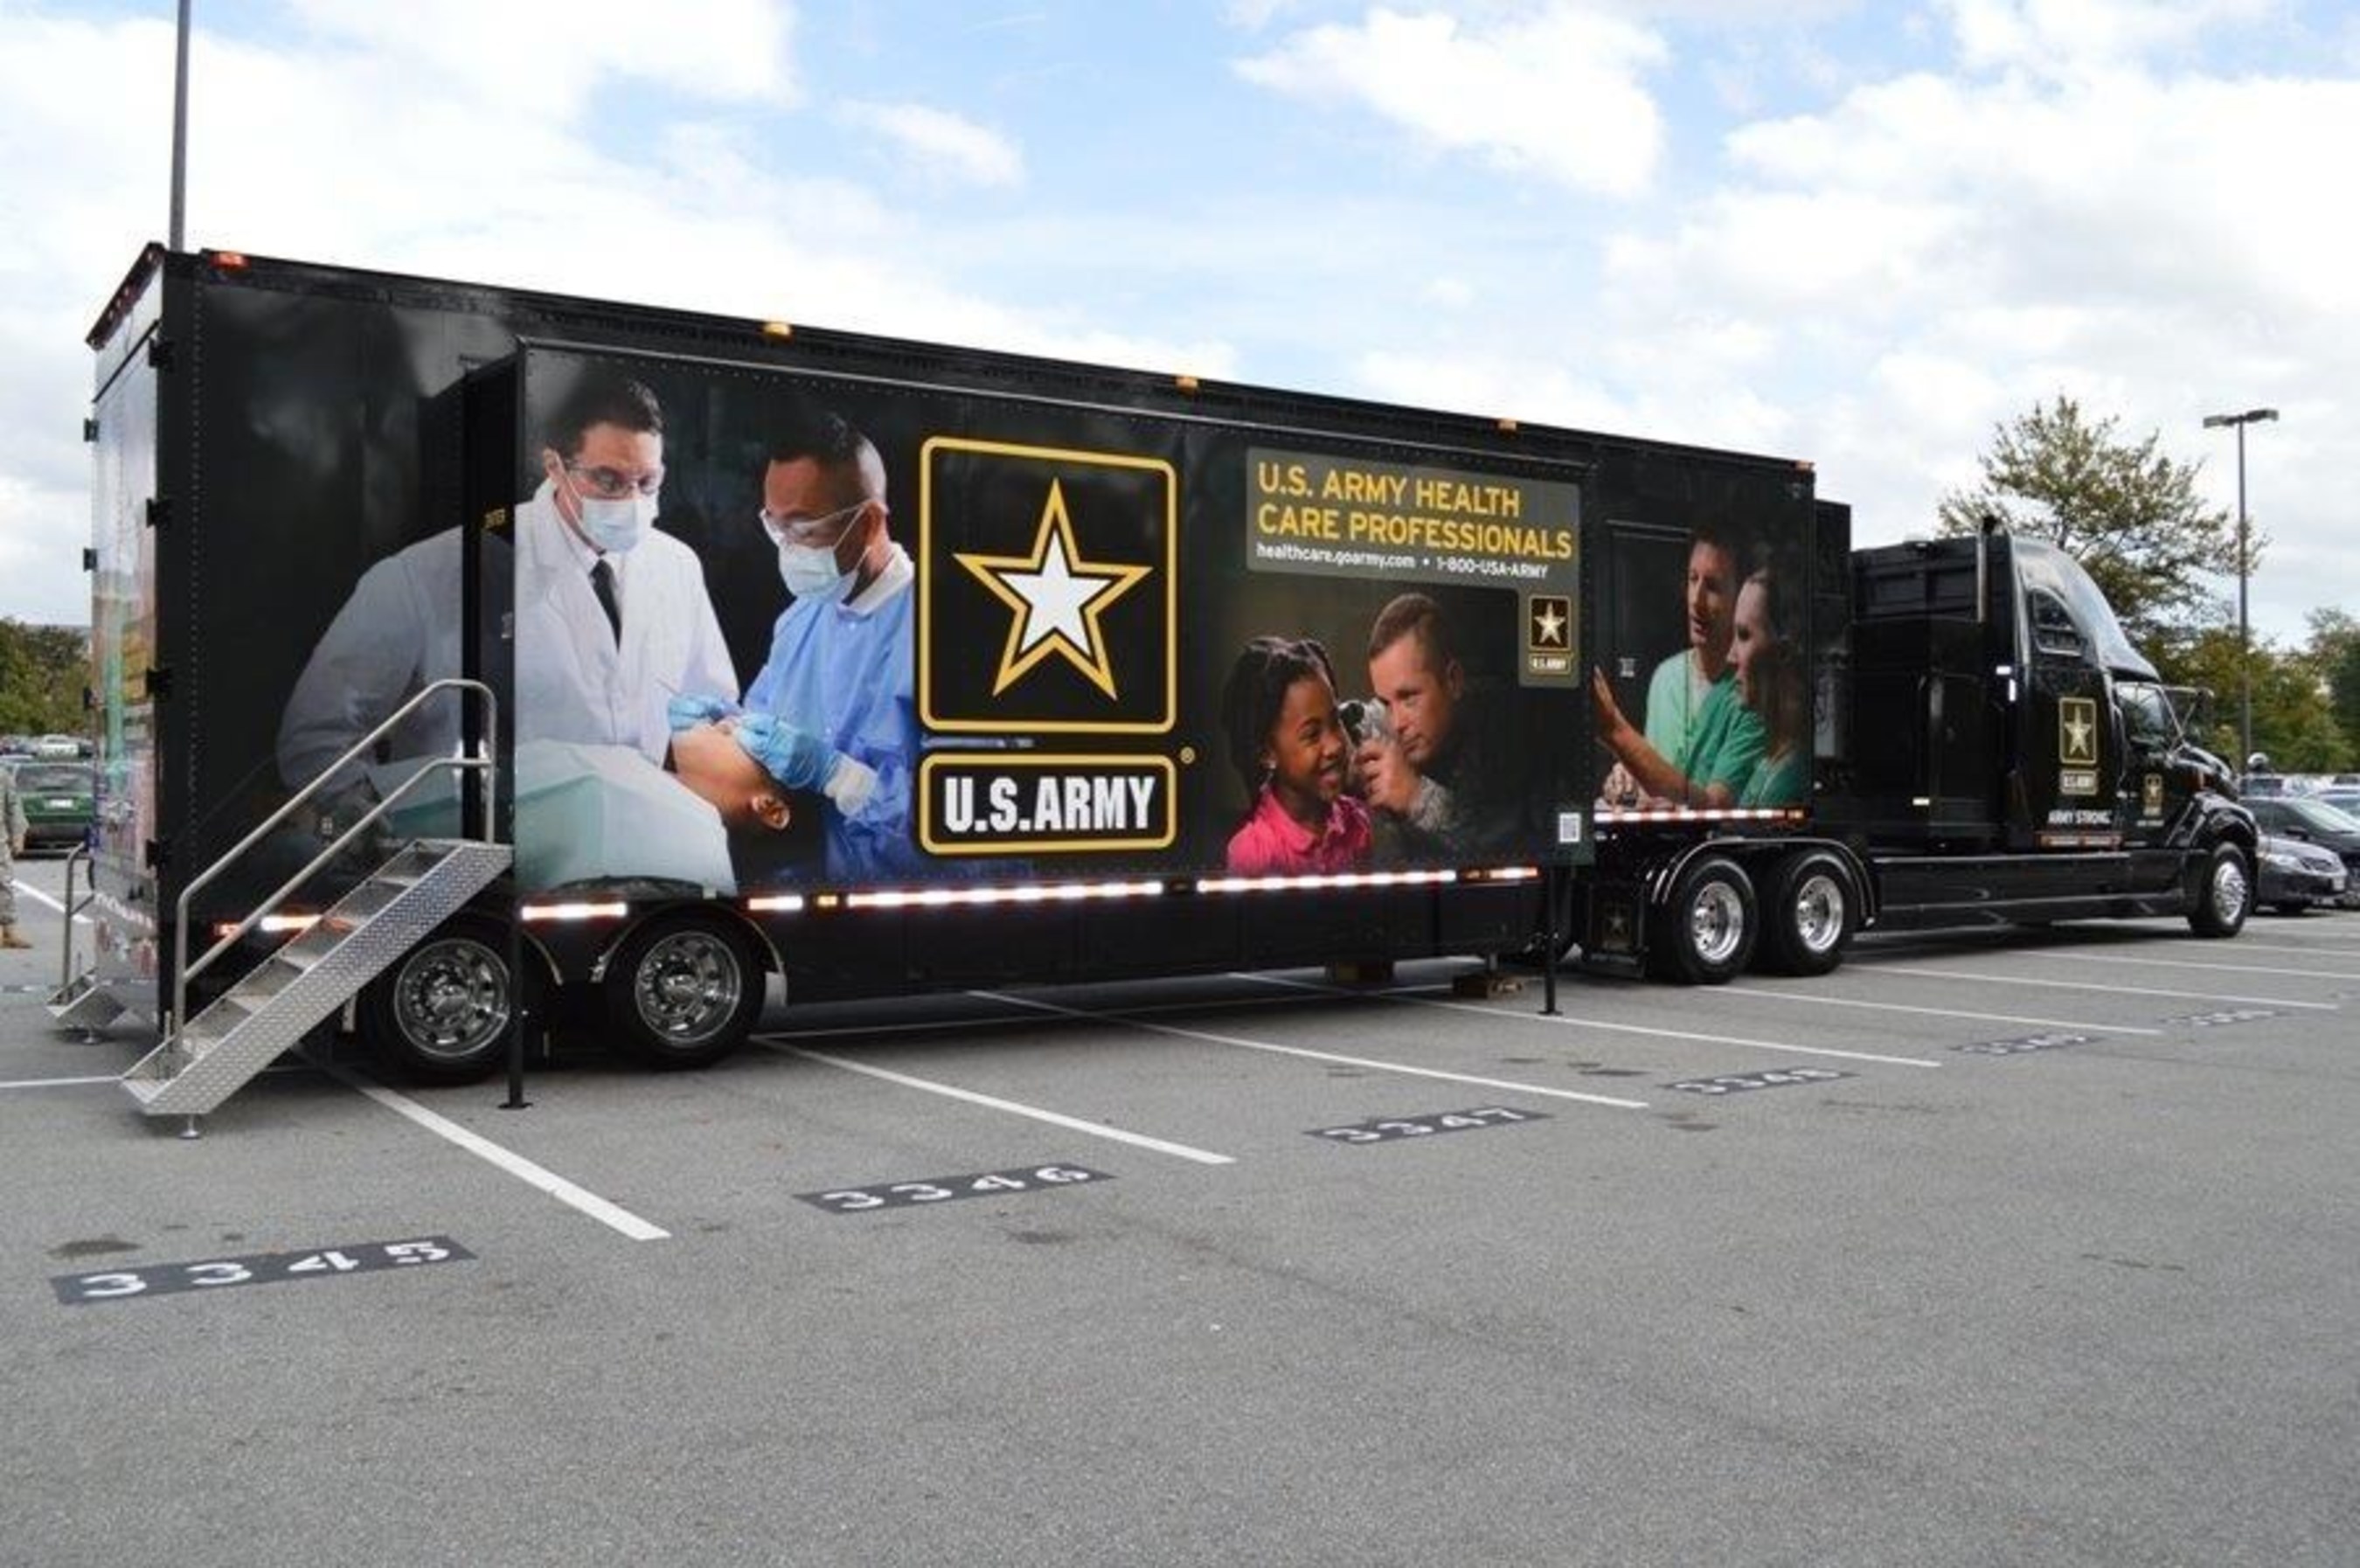 The U.S. Army's newest mobile exhibit, the Medical Marketing Semi, set up on the campus of the University of Maryland at College Park. Official Army photograph by Randy Lescault.